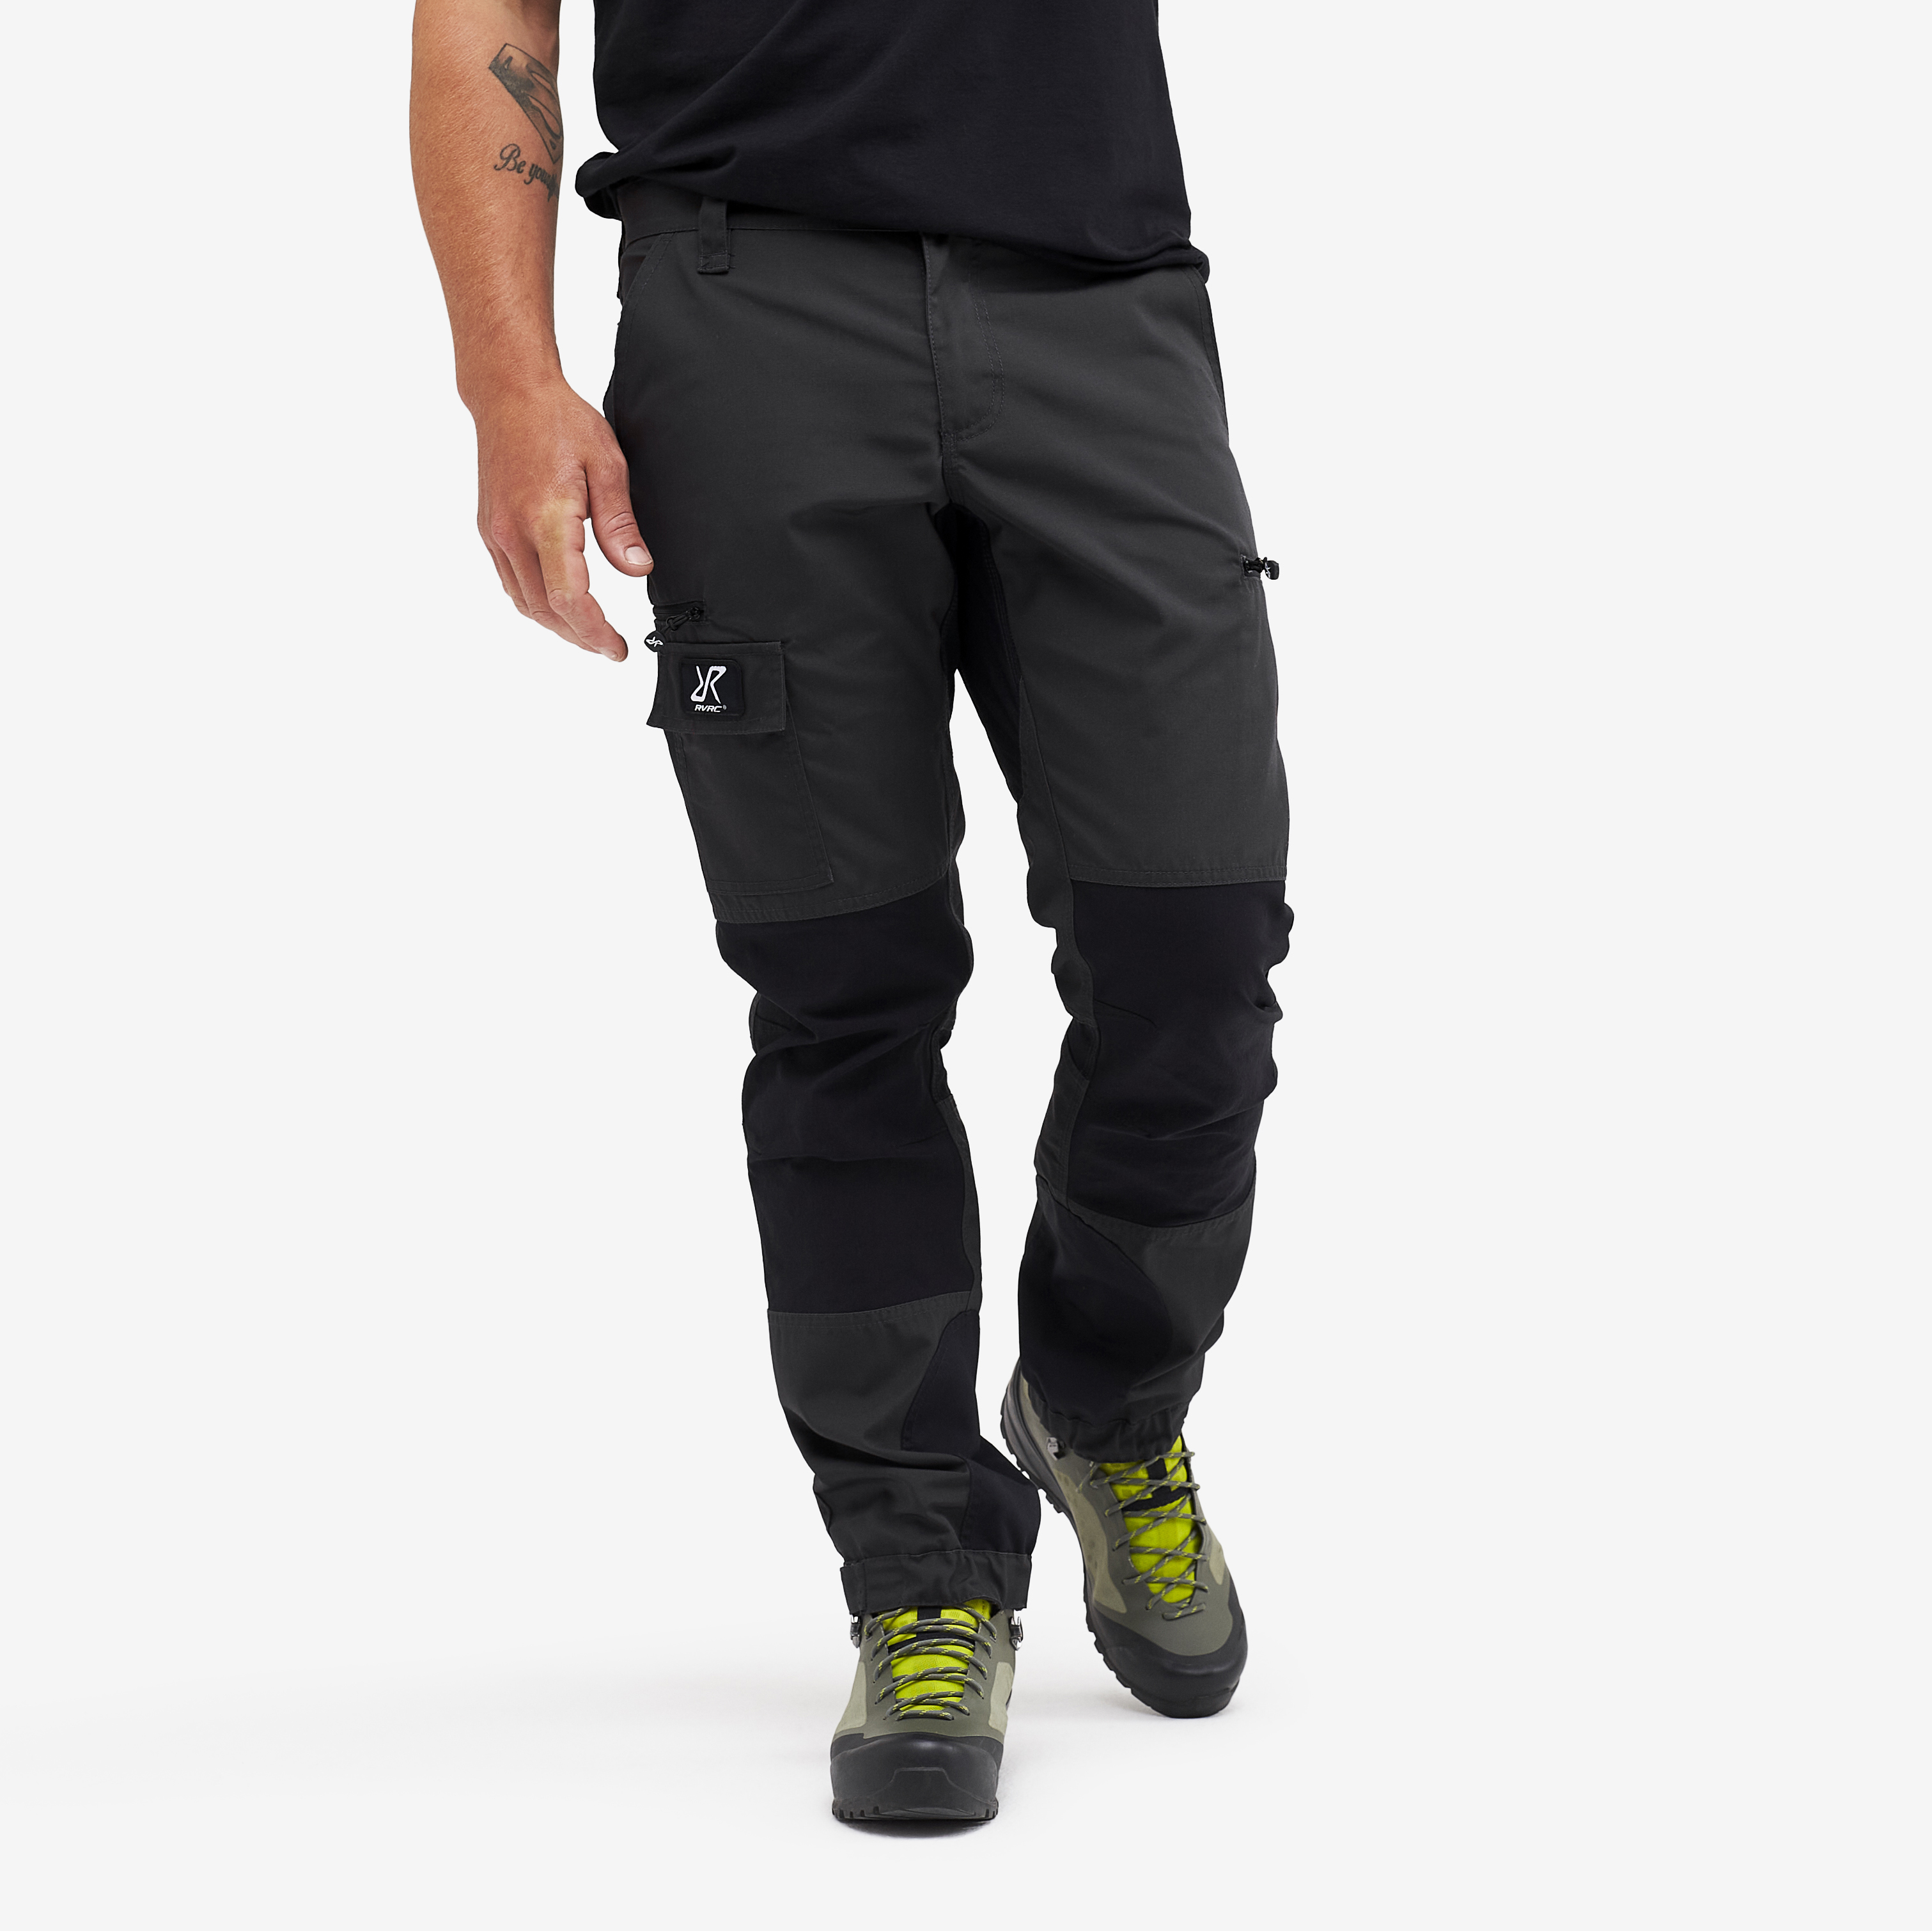 Nordwand Short Trousers Anthracite Men